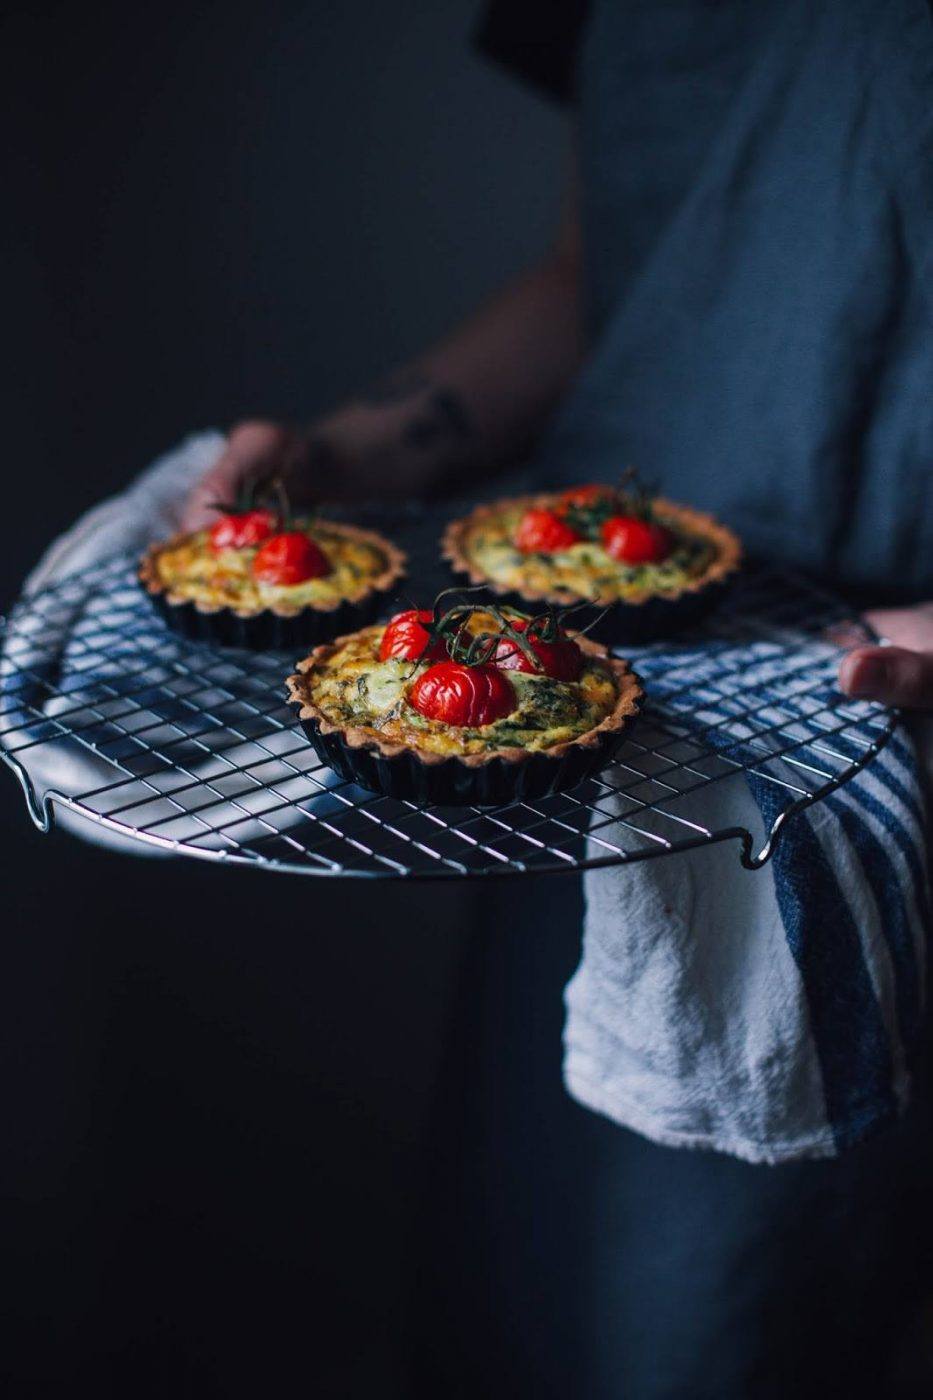 Image for Gluten-free Goatcheese Quiche with Cherry Tomatoes – a Recipe from the new Book “Picknick”